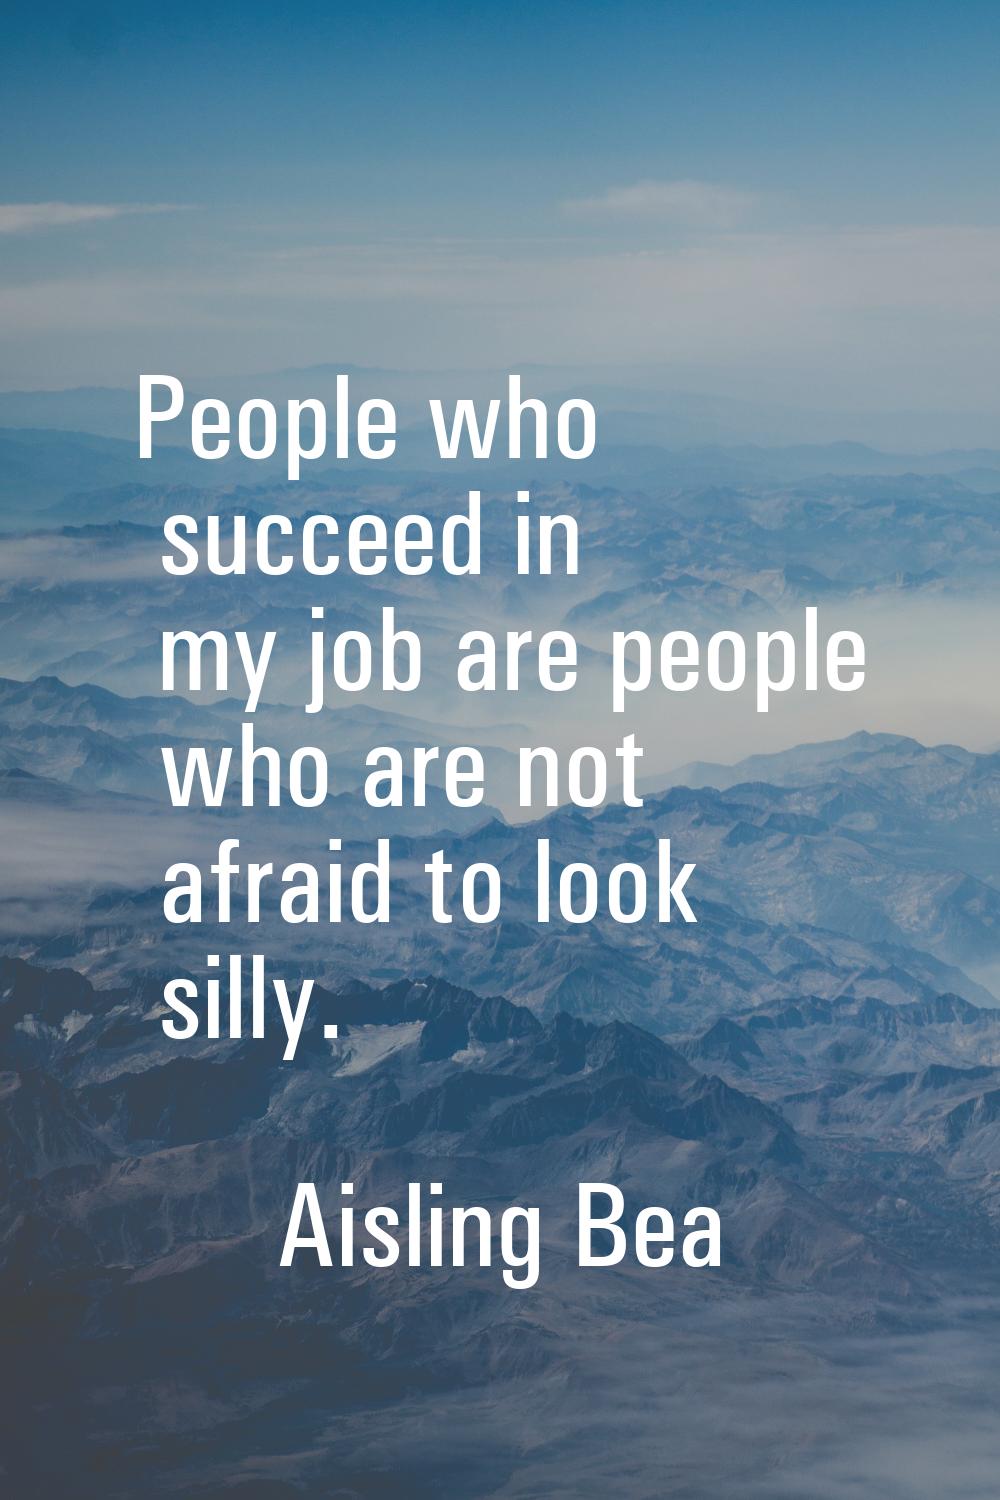 People who succeed in my job are people who are not afraid to look silly.